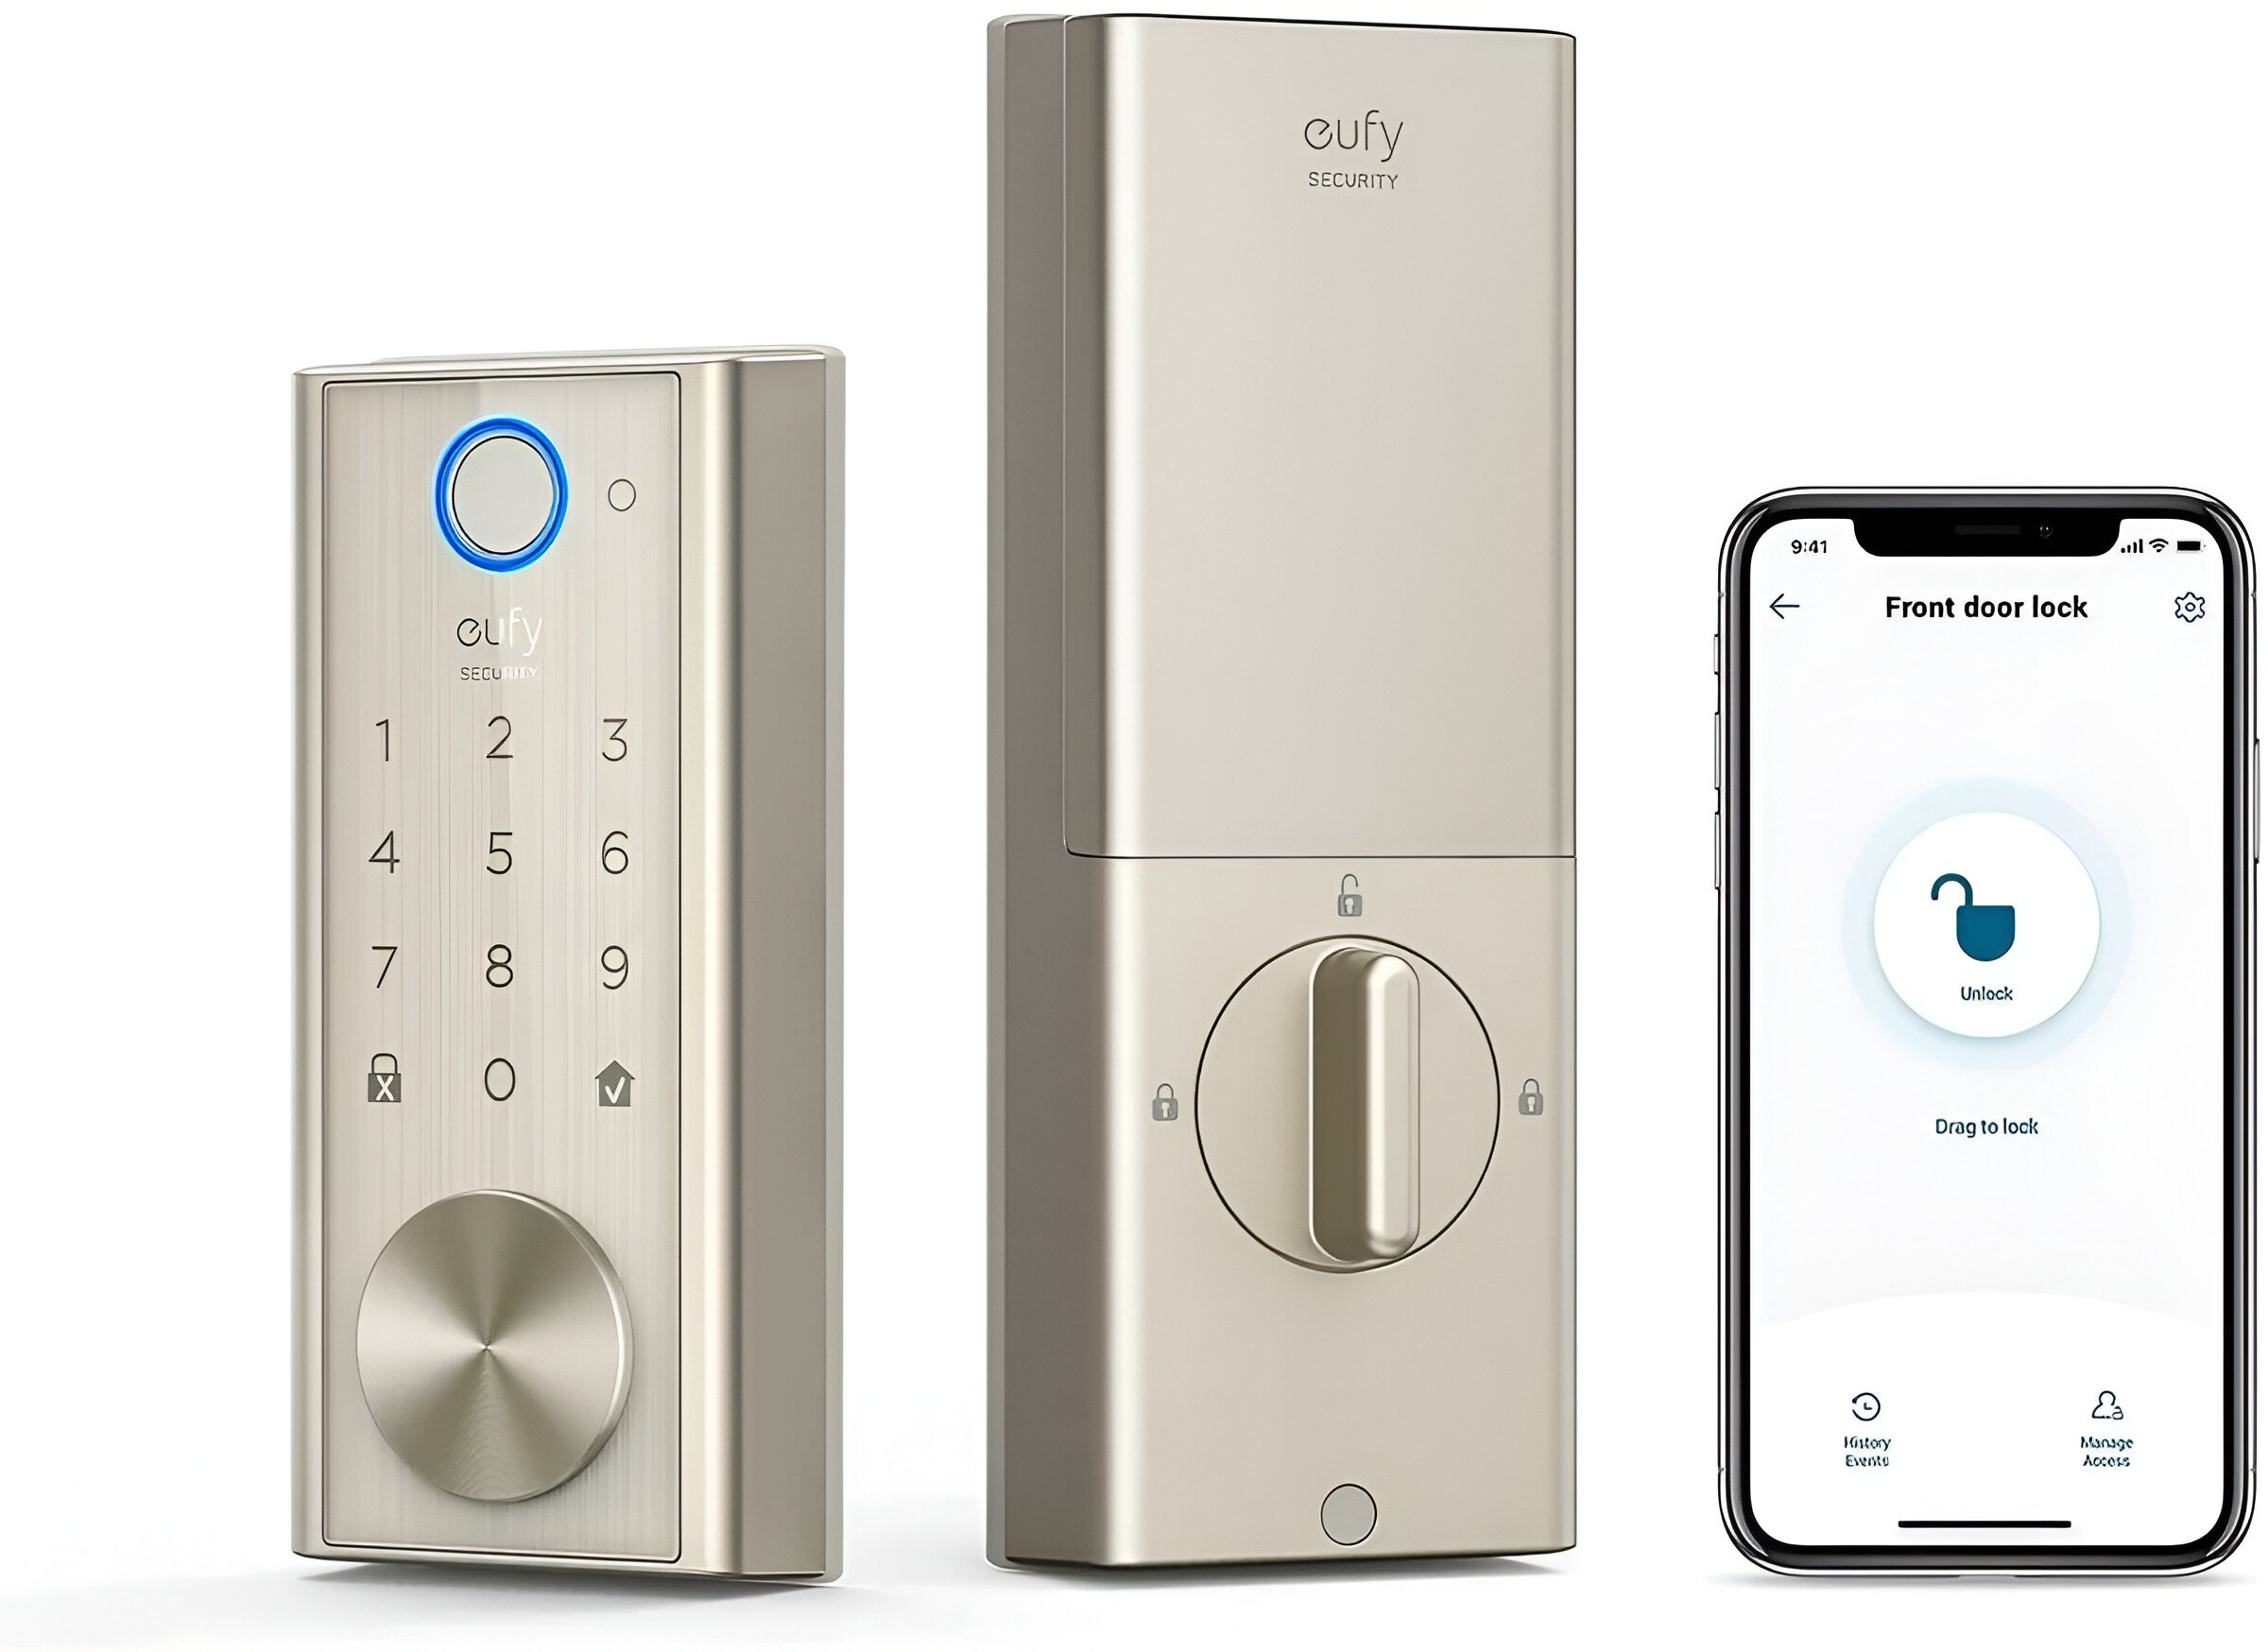 smart-door-lock-with-bluetooth-that-automatically-unlocks-the-door-when-near-with-a-phone